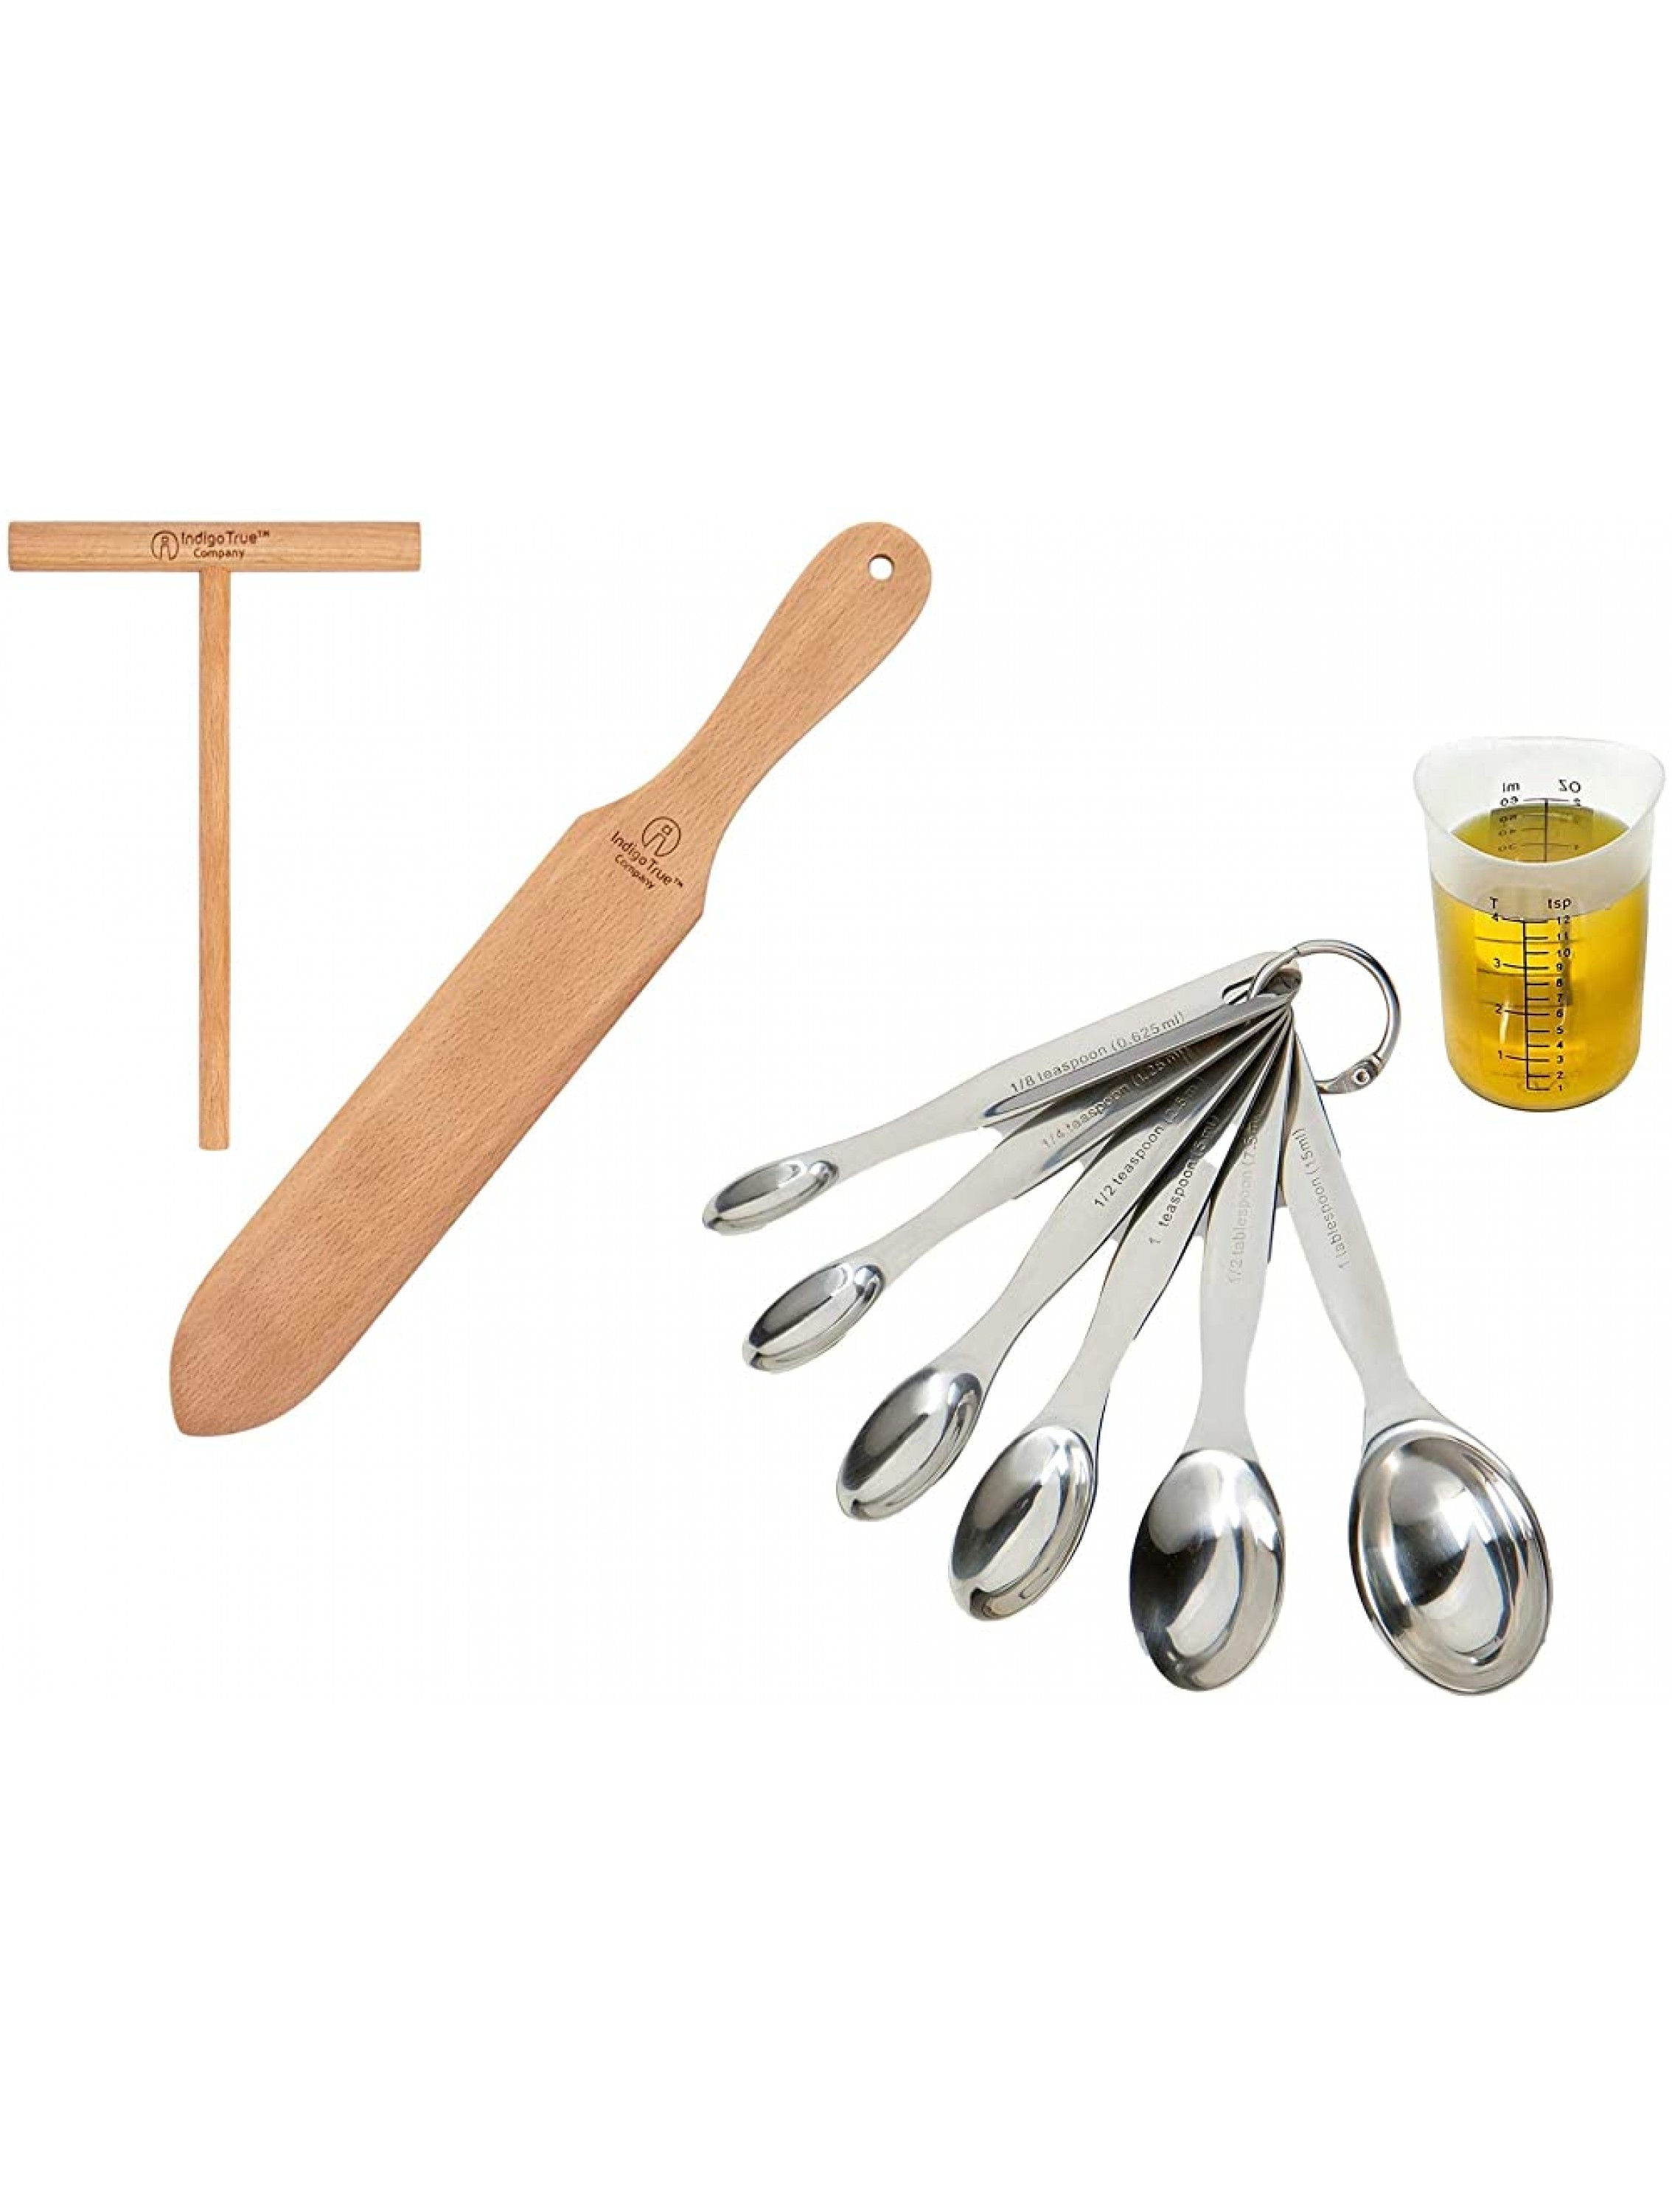 ORIGINAL Crepe Spreader and Spatula Kit 7in with Stainless Steel Measuring Spoons - BUH2SDF3I